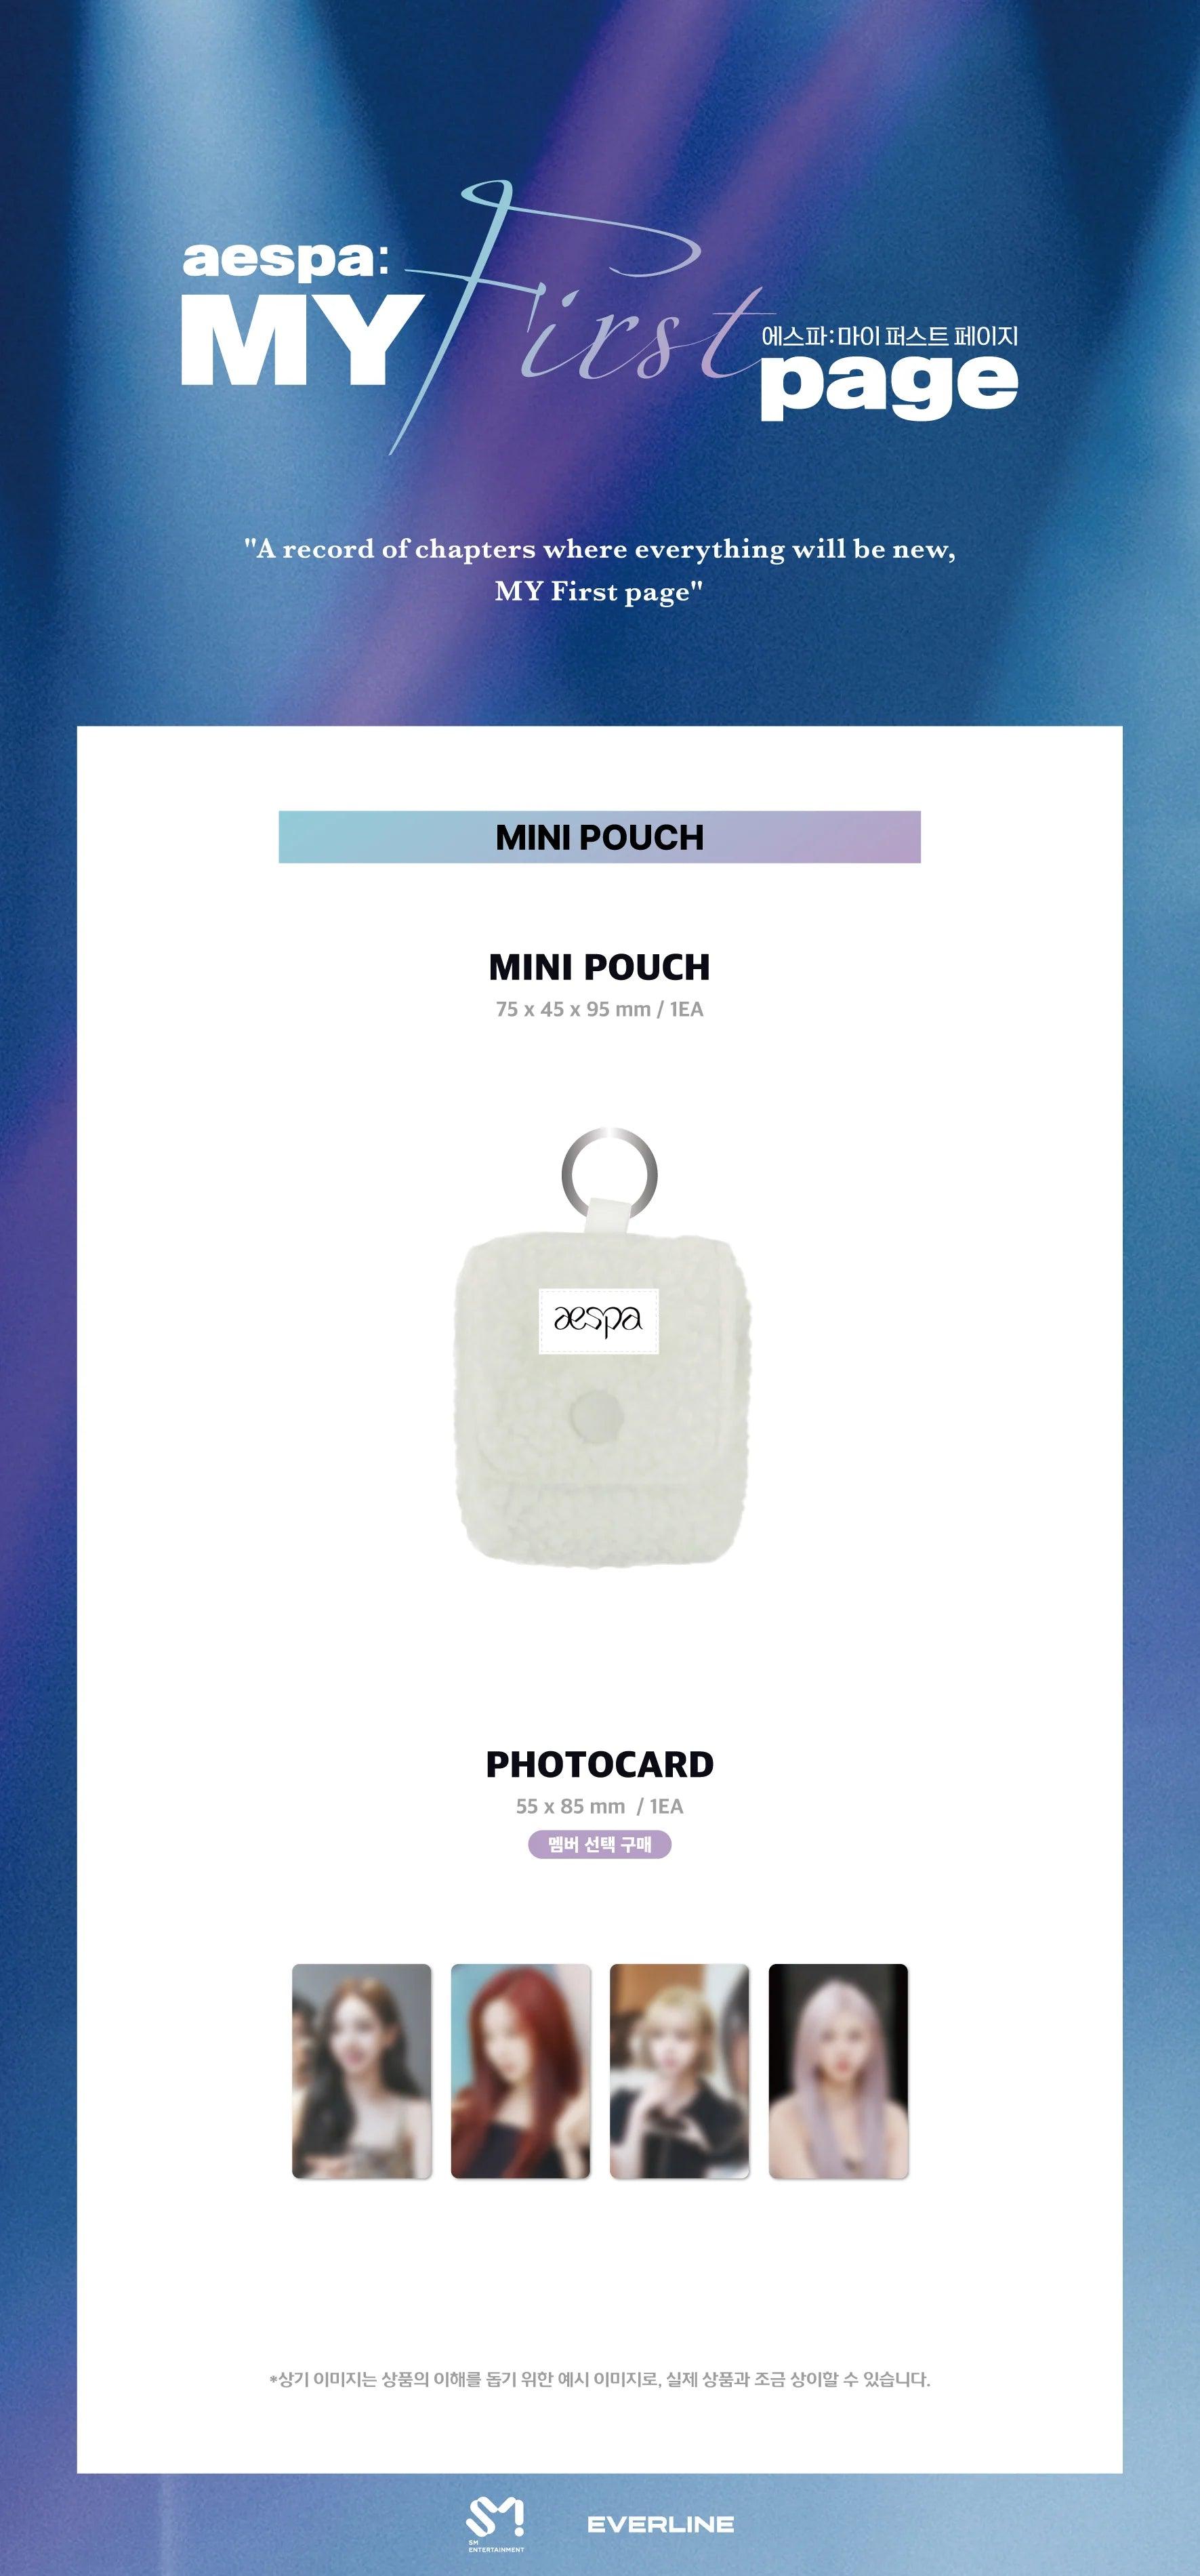 [PRE ORDER] AESPA - MY FIRST PAGE POP UP (Official MD) : Mini Pouch - KAEPJJANG SHOP (캡짱 숍)